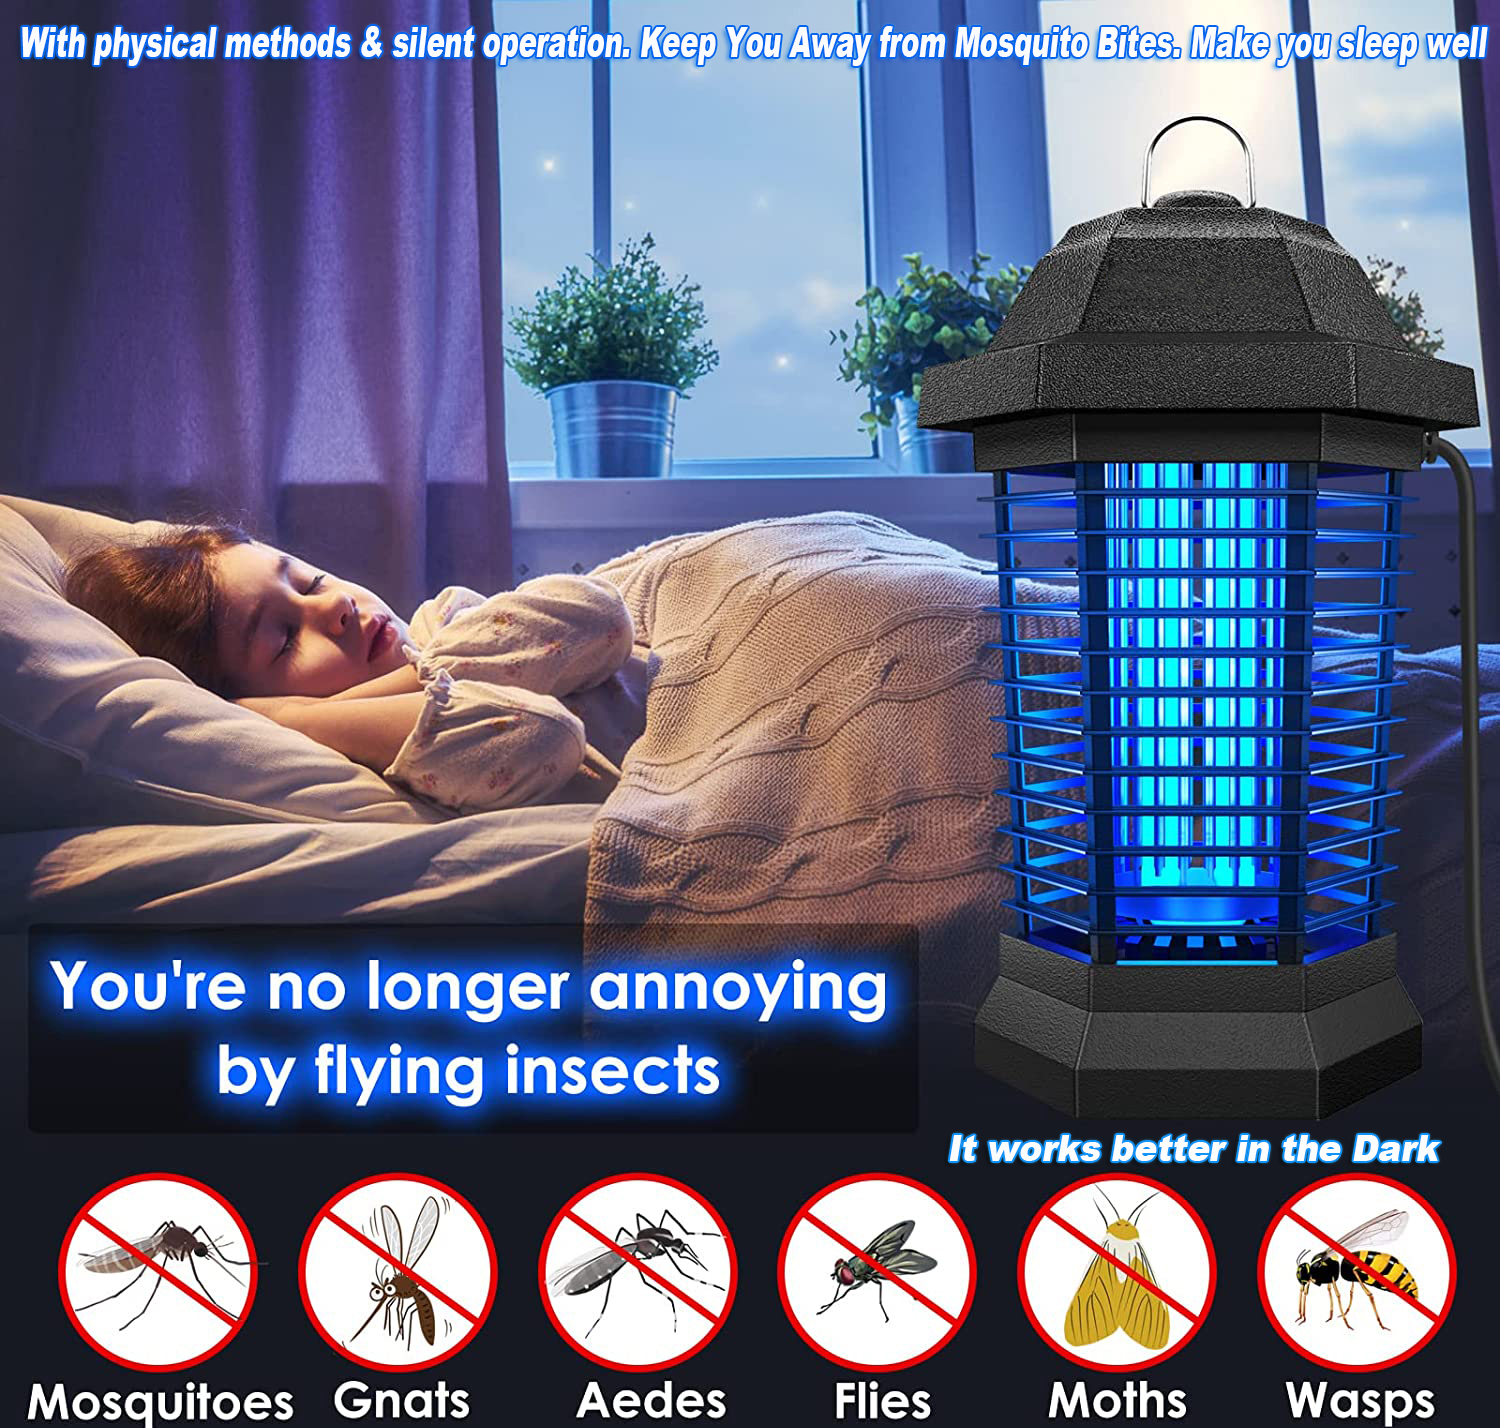 LED-Desk-Lights-Electric-Insect-Killer-Bug-Zappers-Powerful-4200V-25W-Waterproof-Mosquito-Zappers-Lamp-with-UV-Light-Protective-ABS-Housing-for-Indoor-Outdoor-75